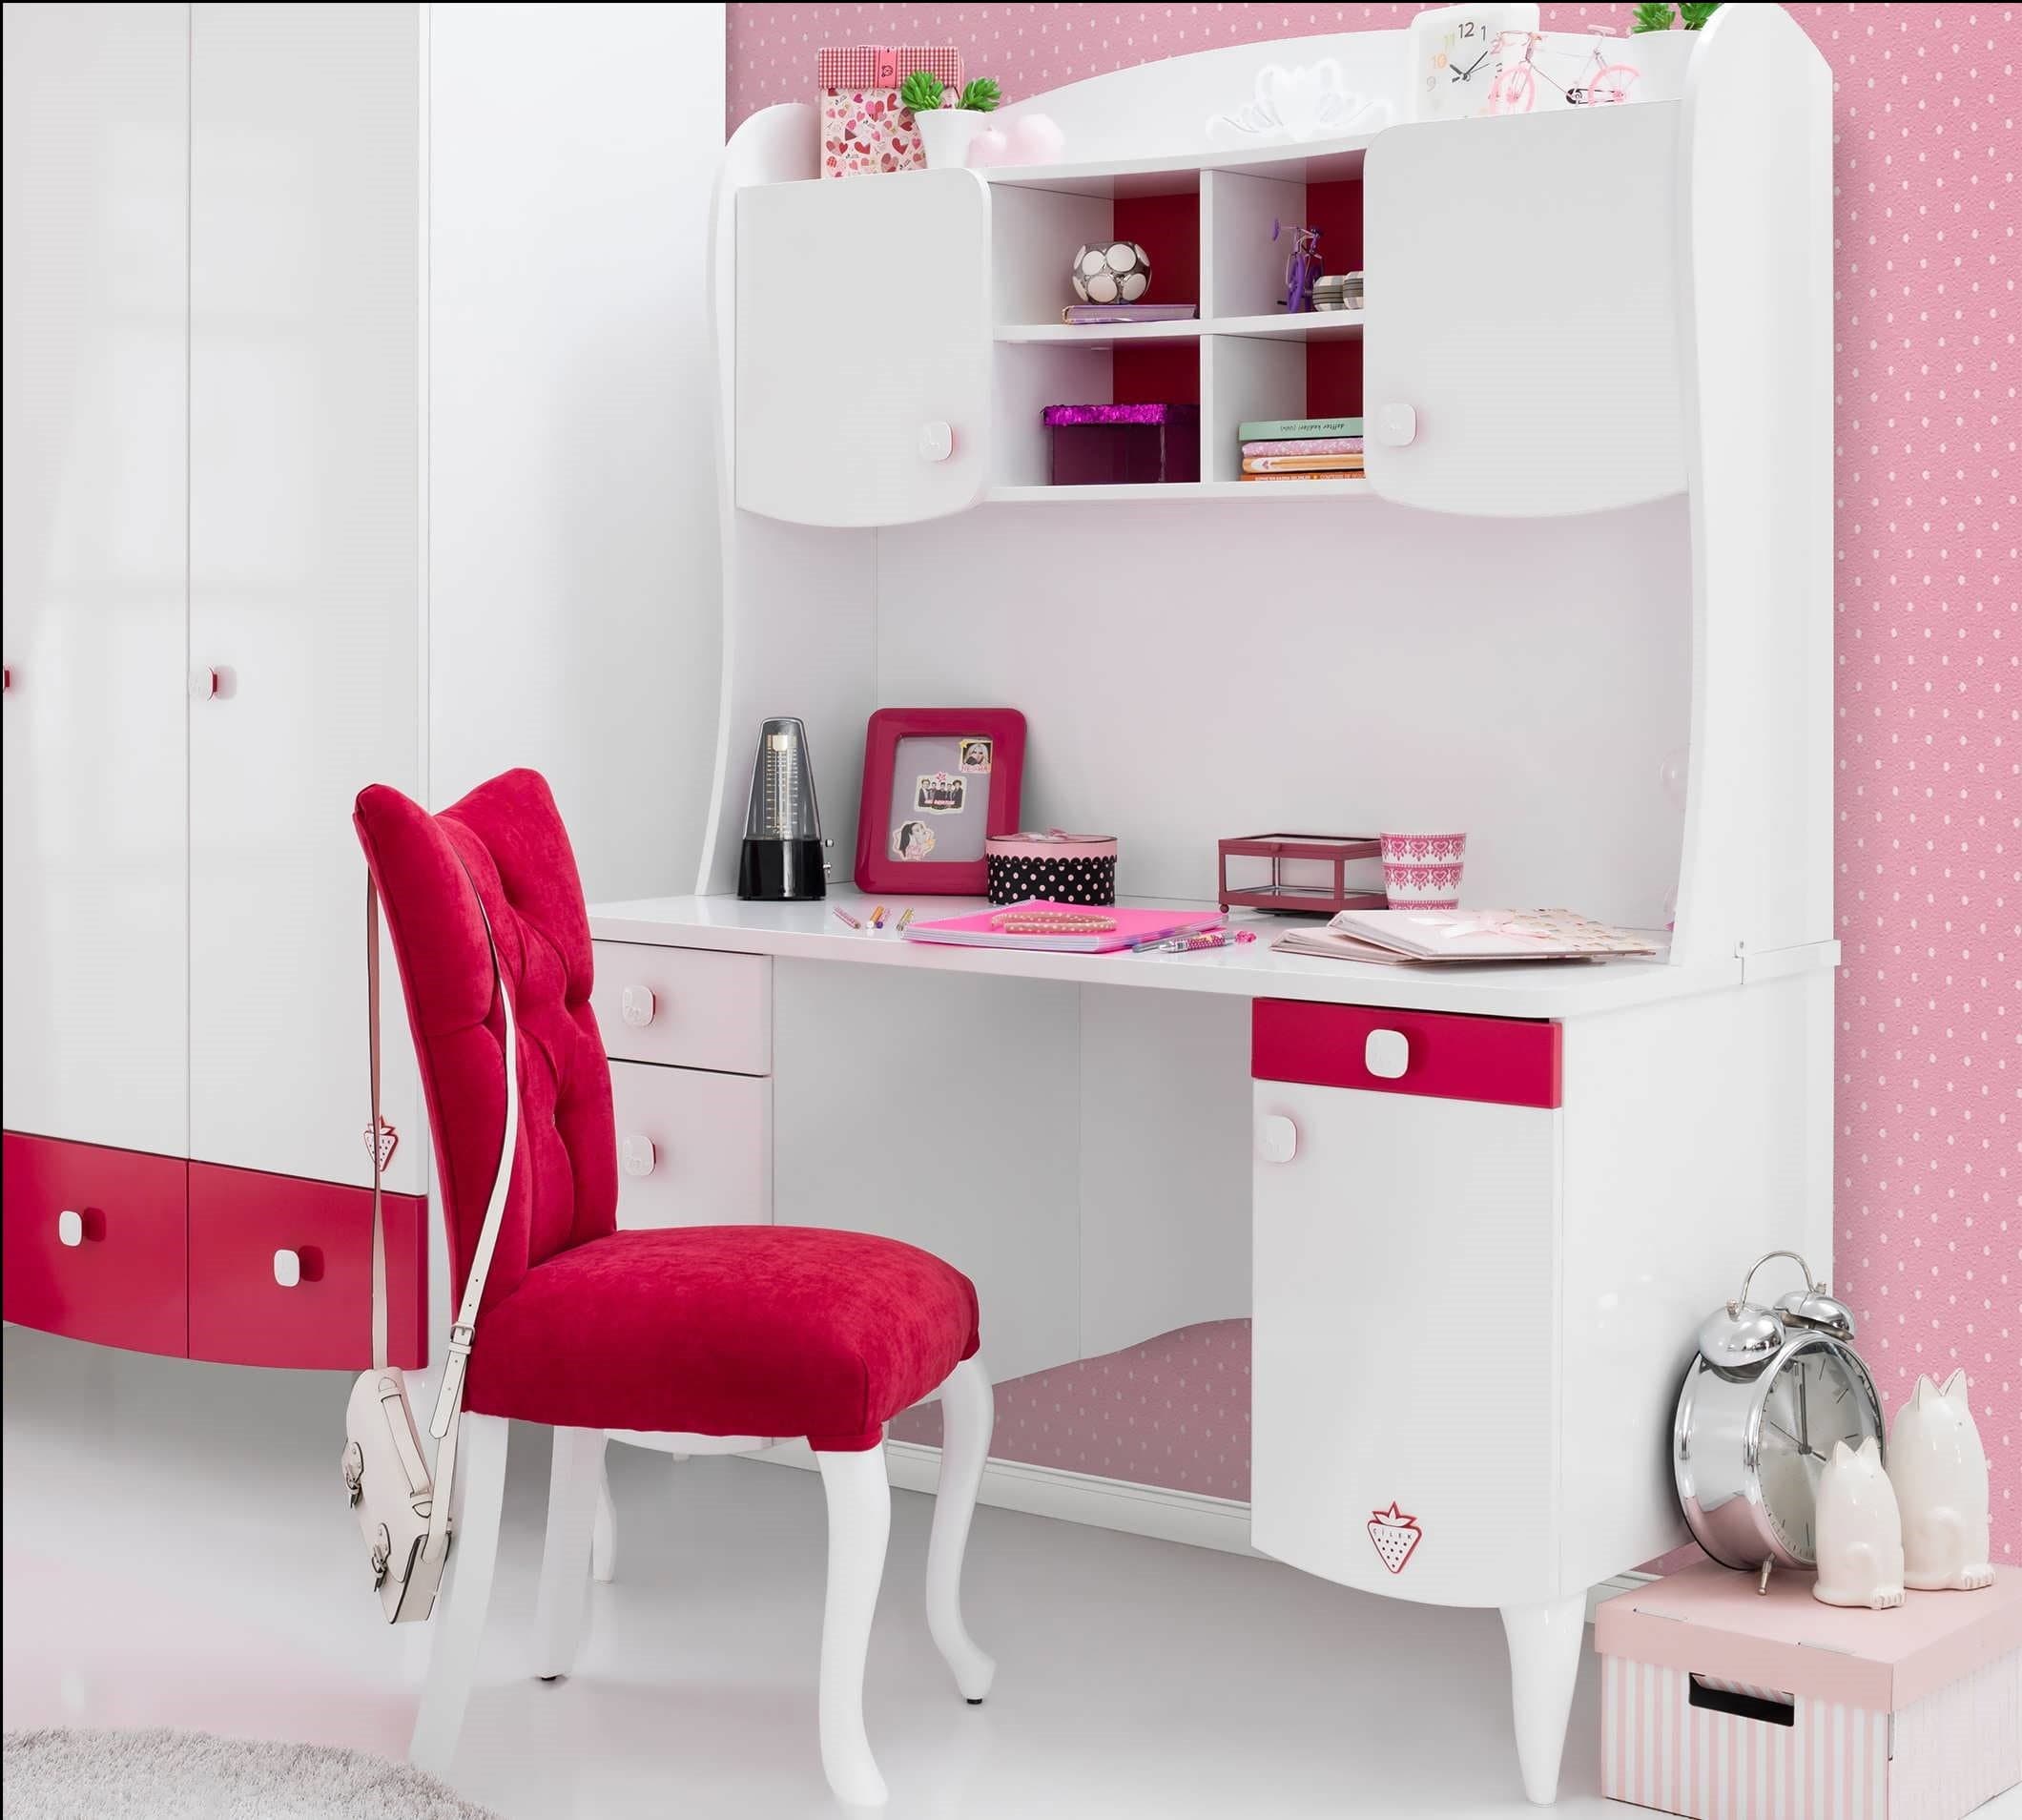 https://up.rozbano.com/view/3429662/Gami%20No%20Dena%20is%20a%20supplier%20of%20wooden%20cupboards-01.jpg